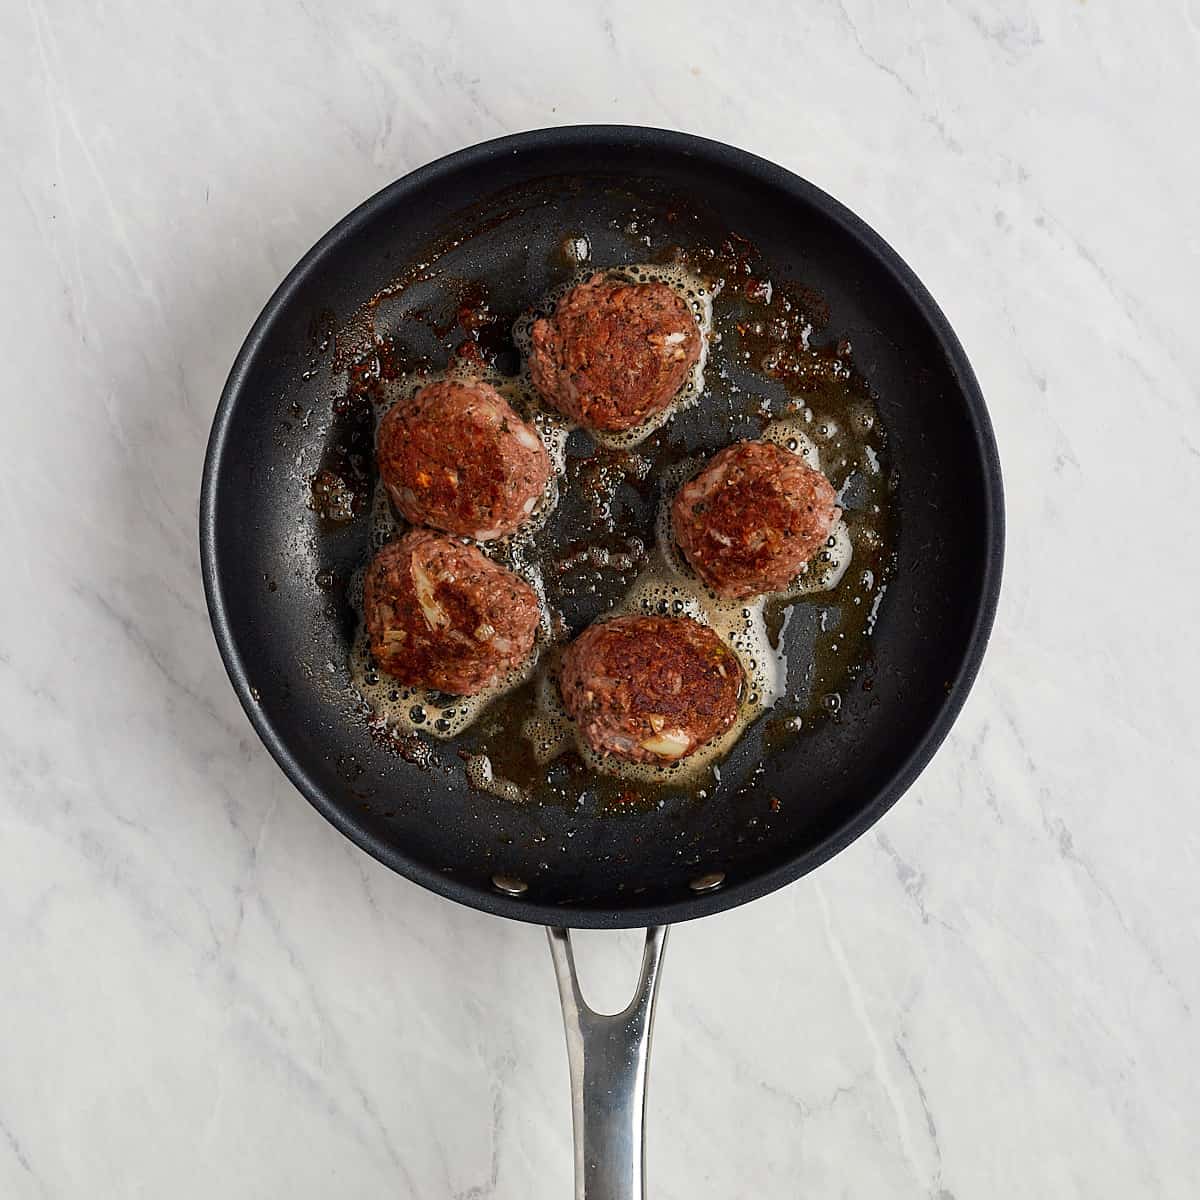 vegetarian meatballs being cooked in a non stick skillet. one side has already been browned.